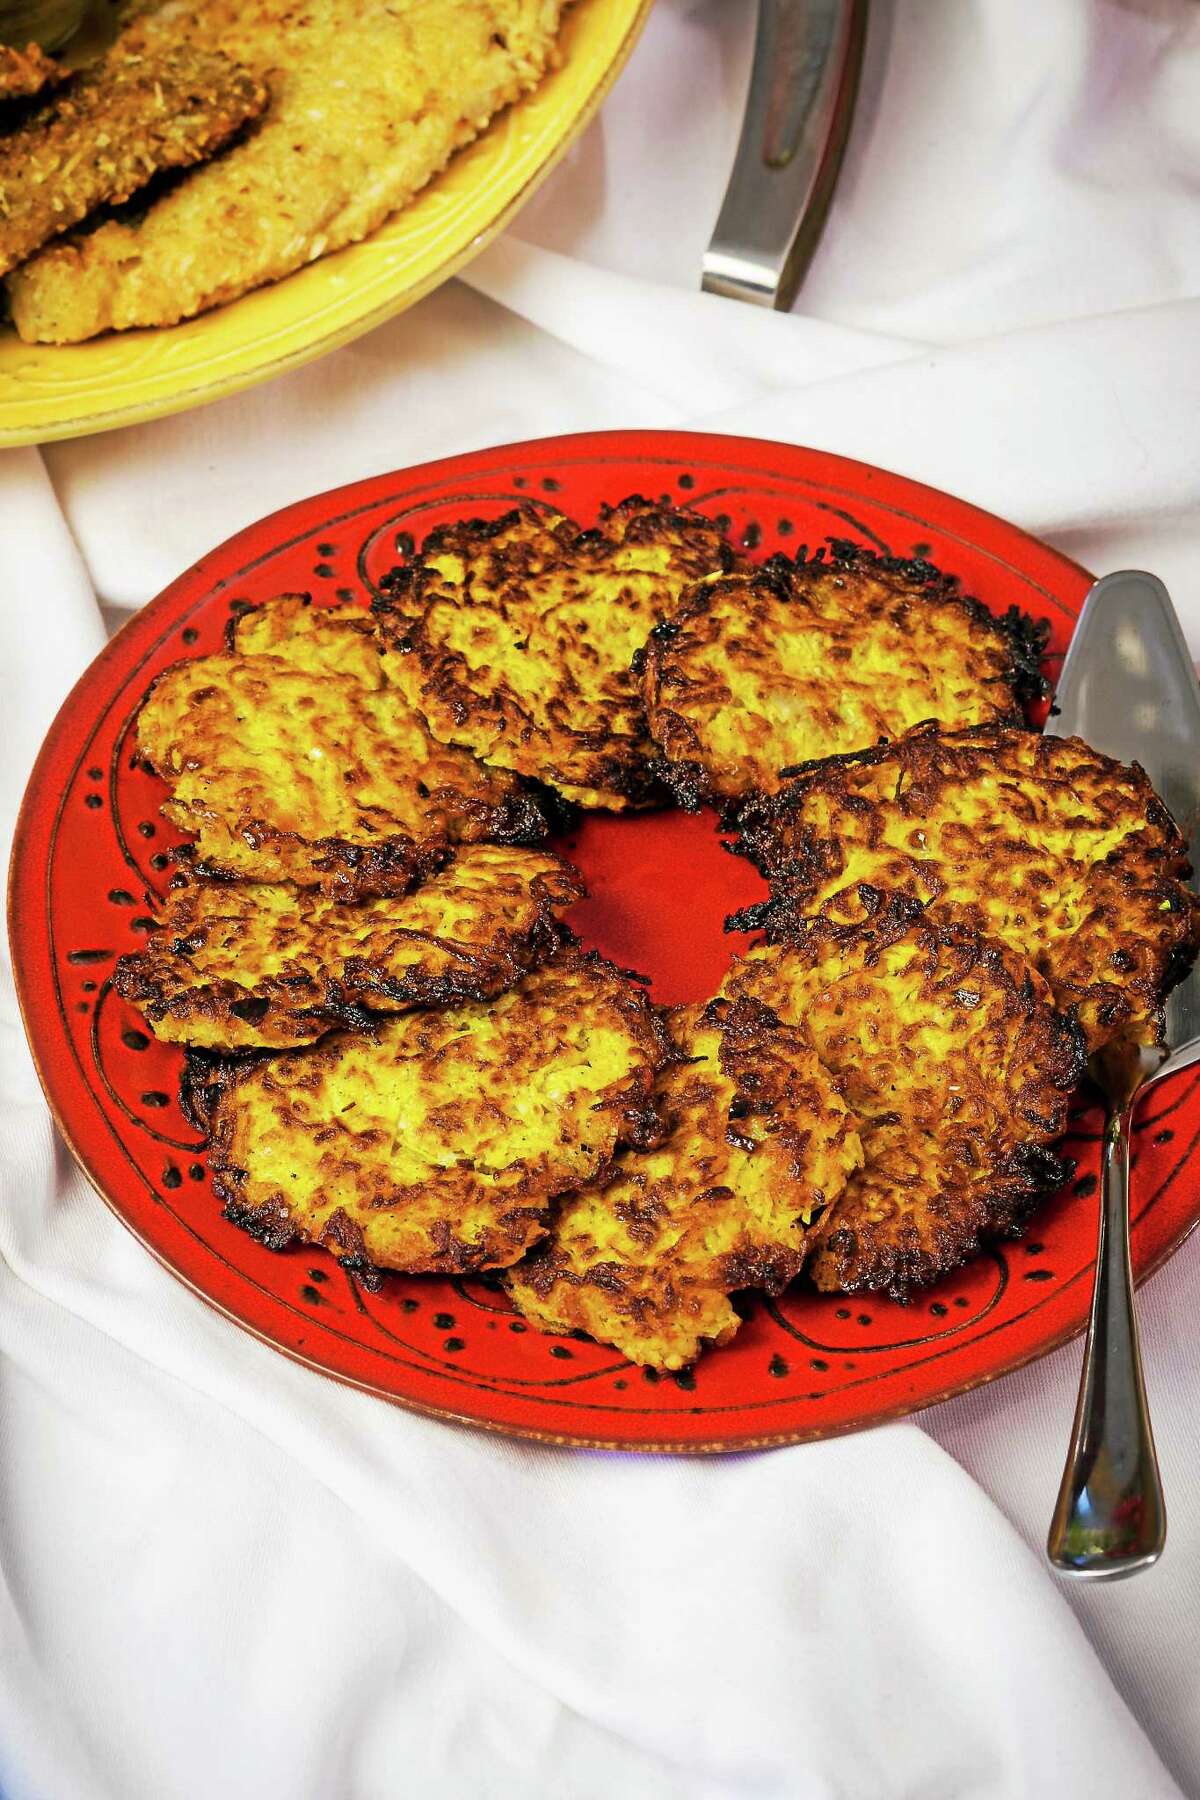 Spaghetti Squash Fritters from “The New Passover Cookbook.”